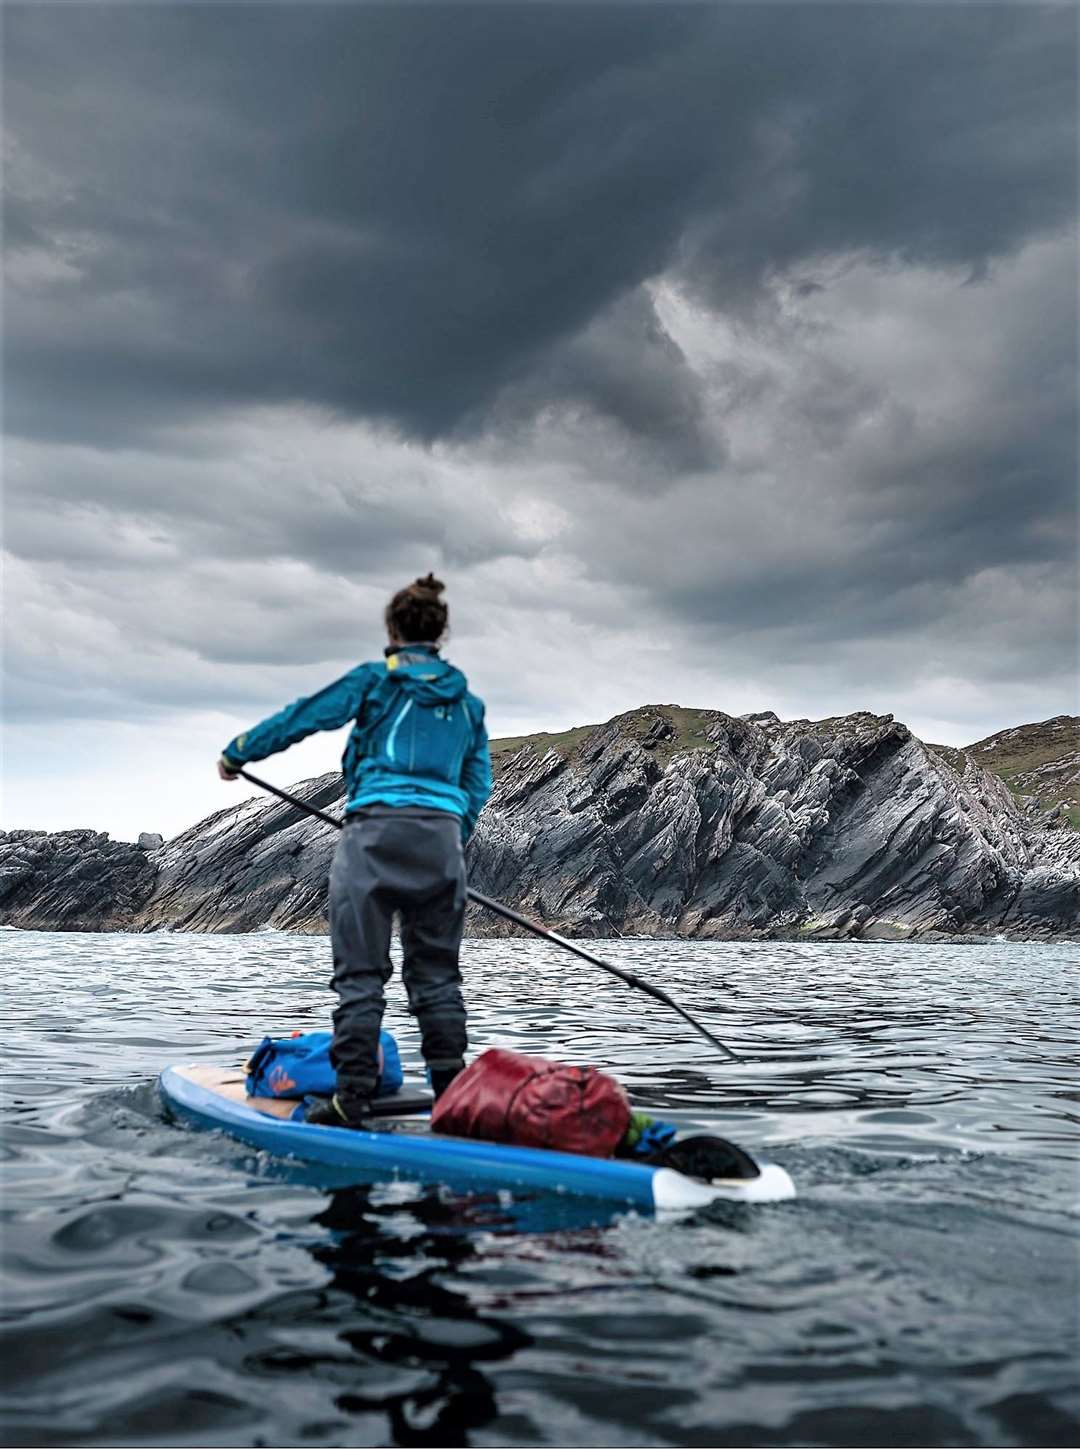 Paddleboarding is the adventurous activity those polled would most like to try out. Picture: James Appleton.